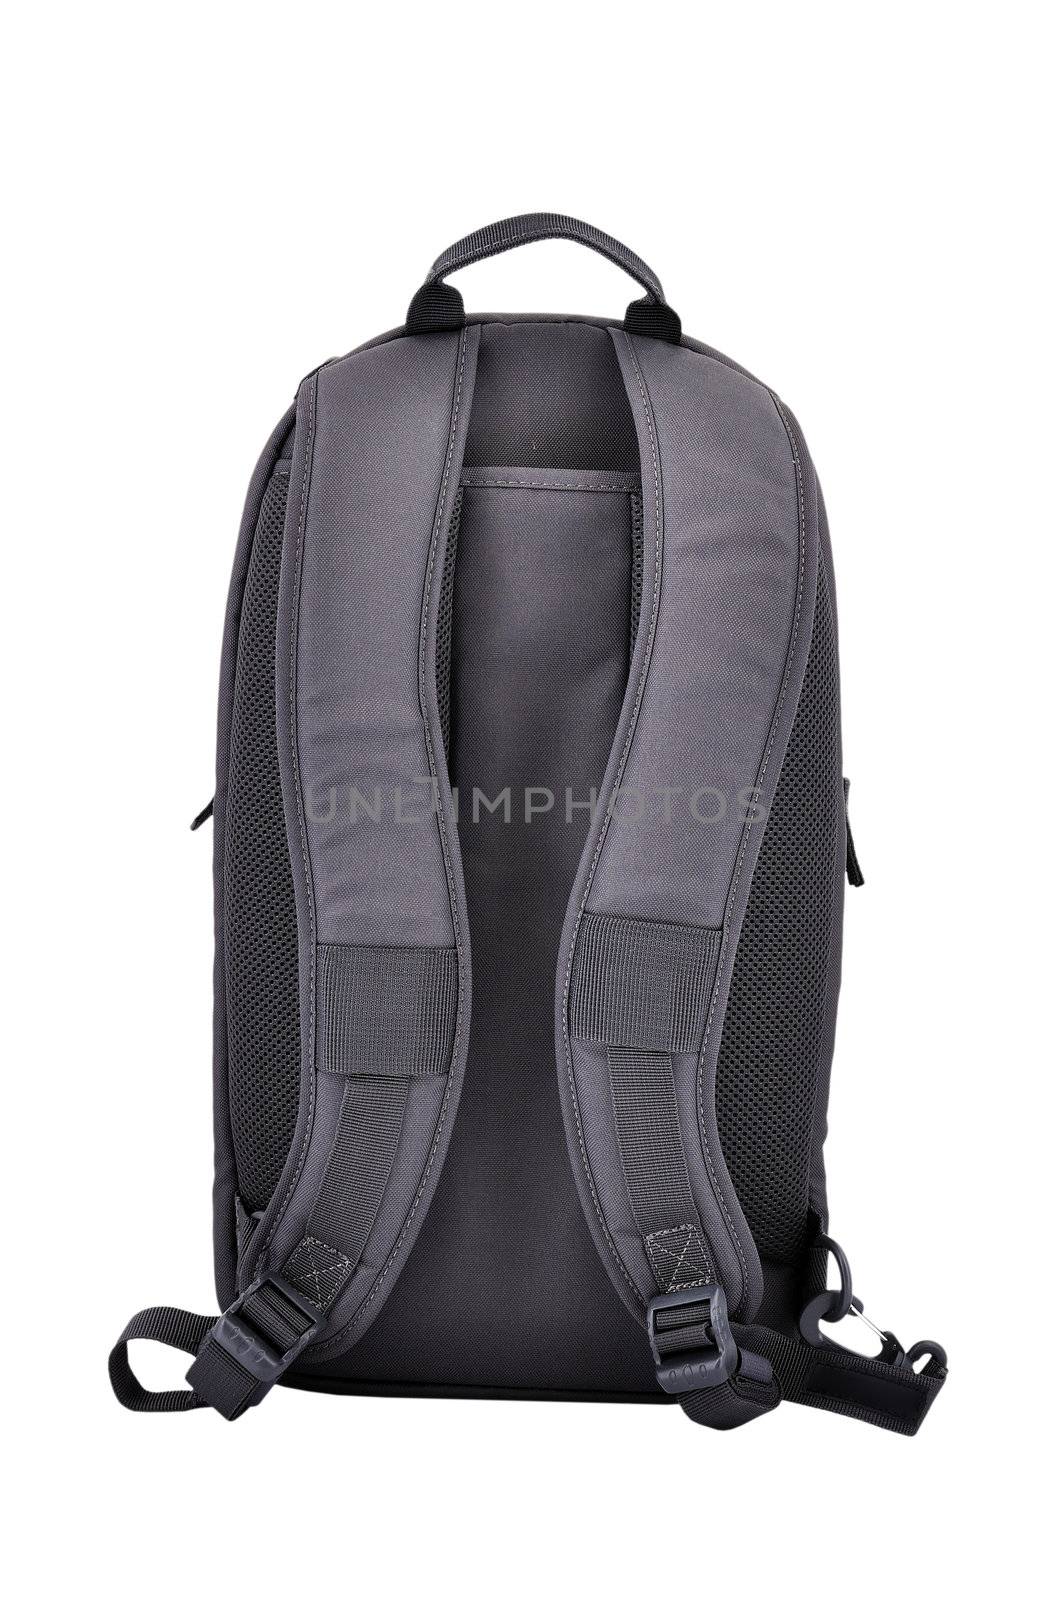 Backpack back view on a white background